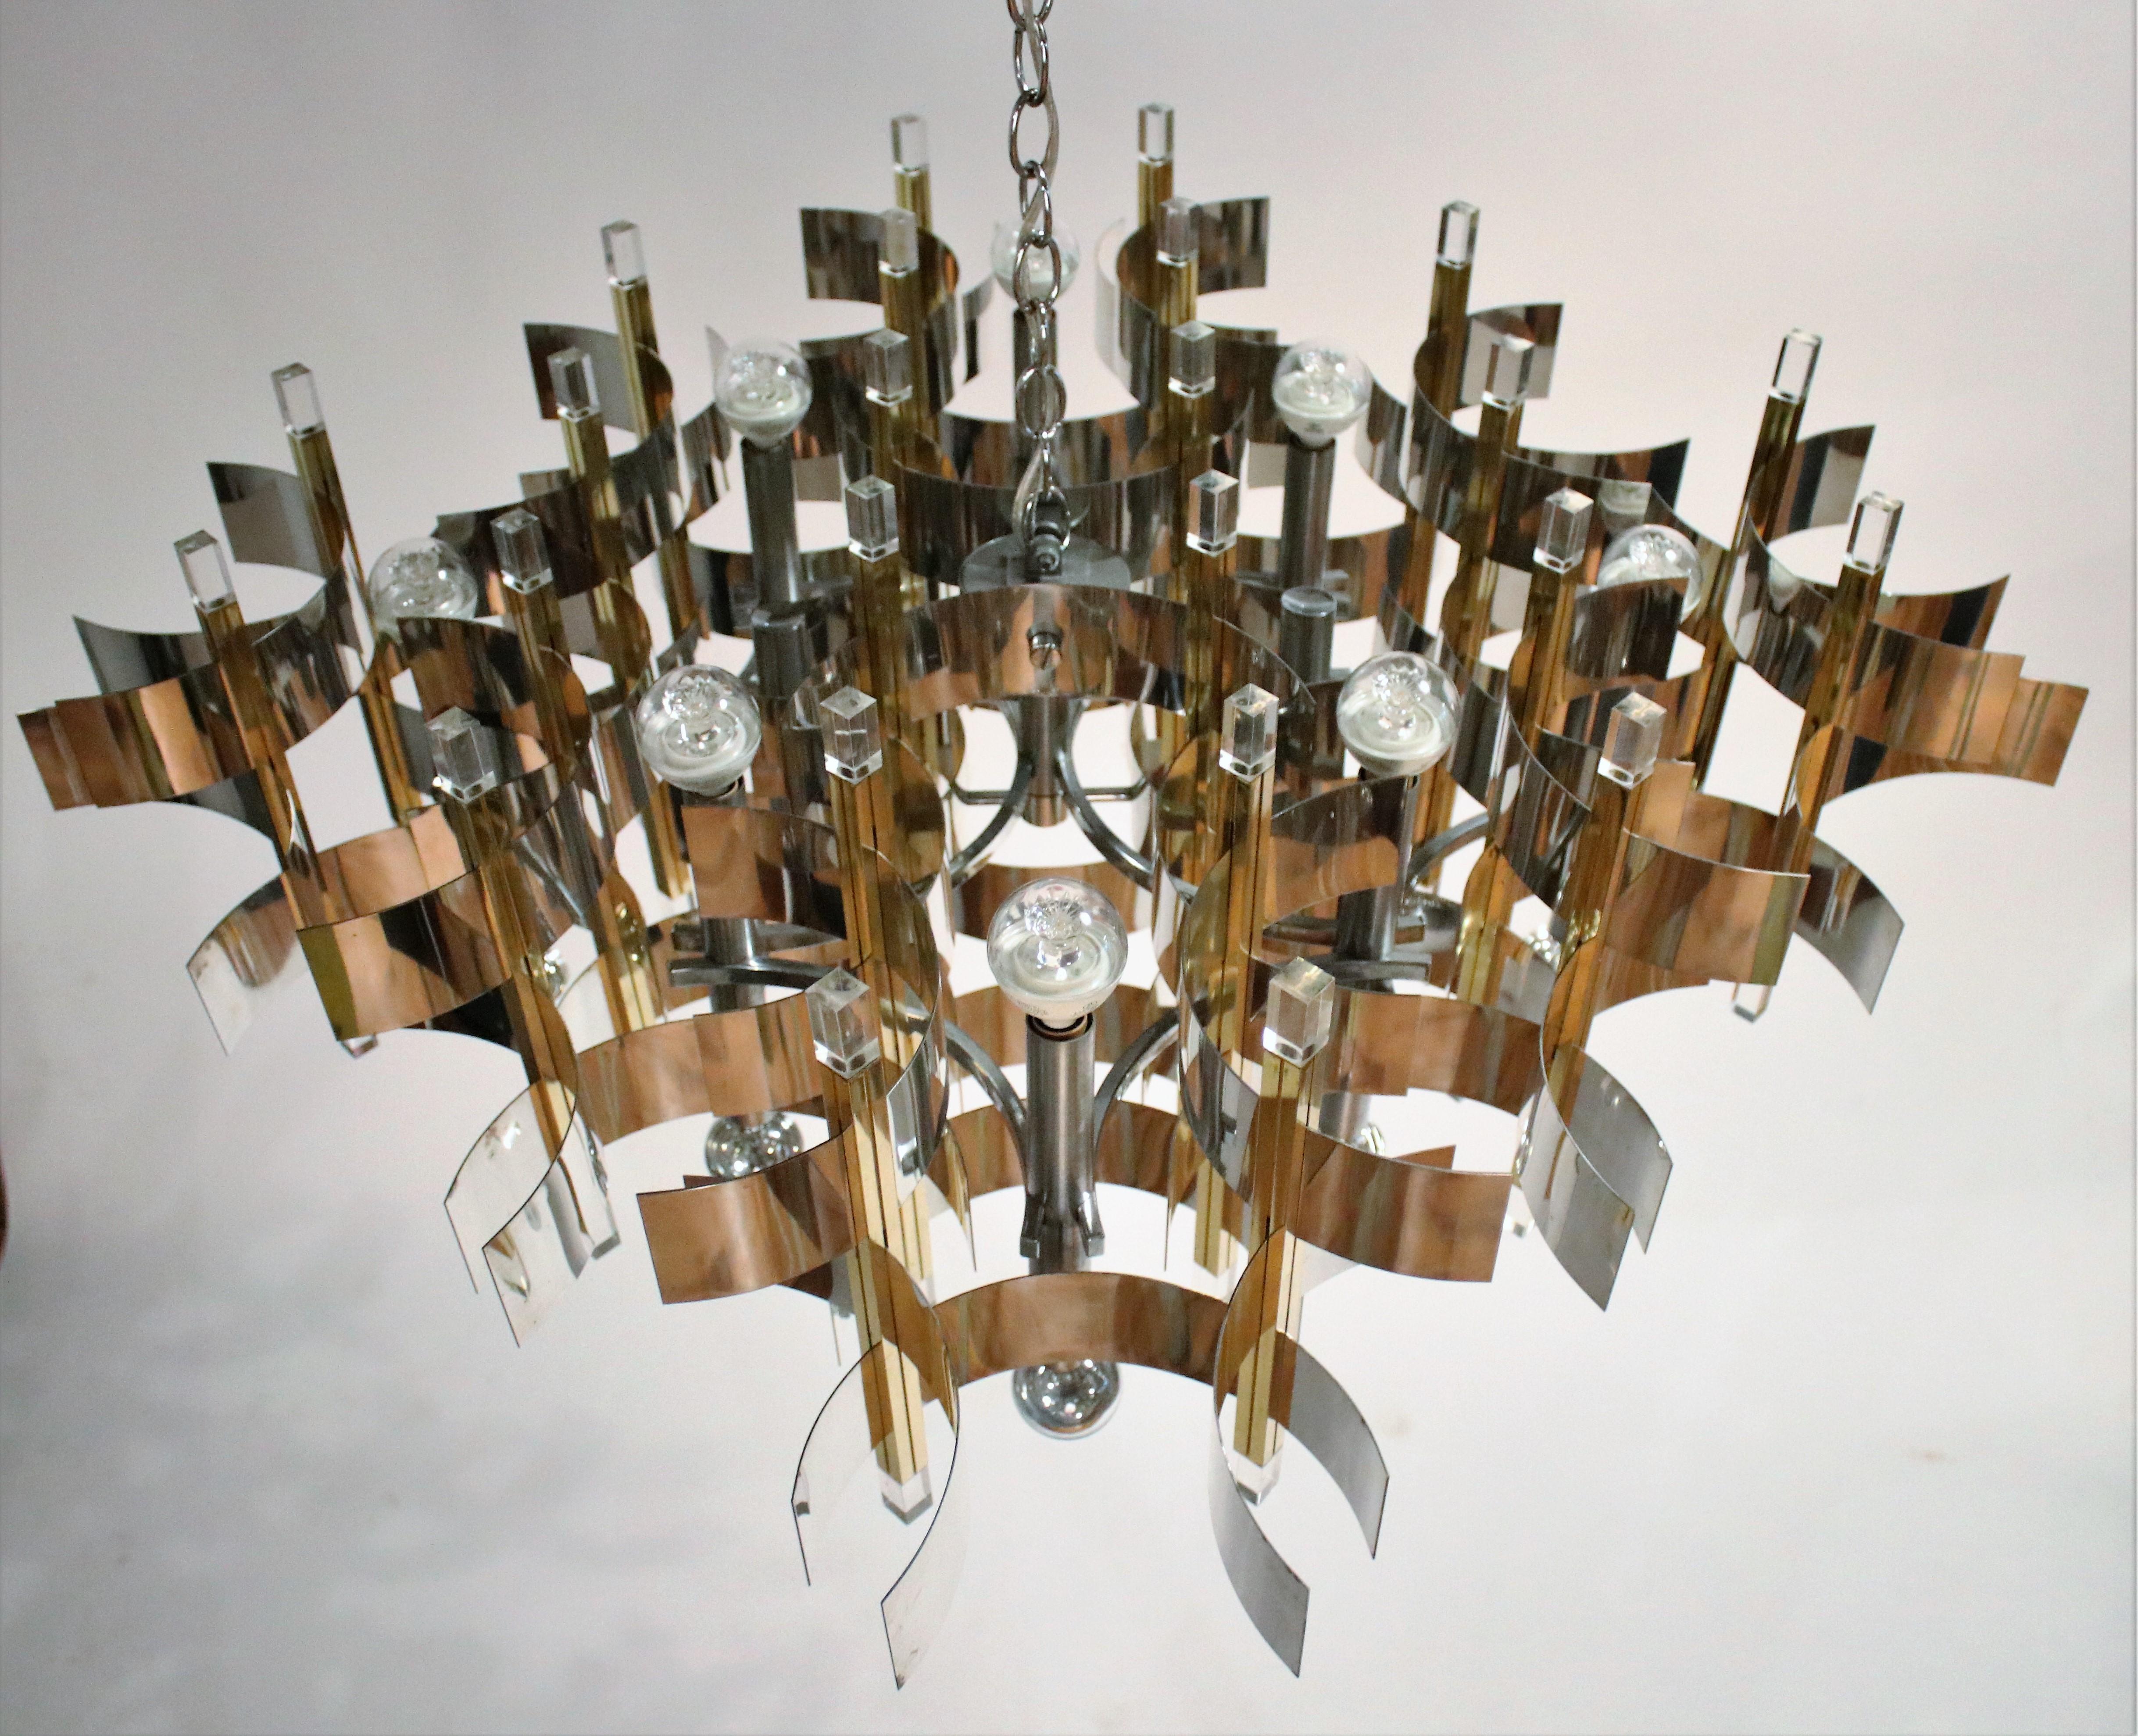 Massive Modernist chandelier by Italian designer Gaetano Sciolari, 1970s. Made of nickel and brass curved bands and rods with Lucite caps. Huge fixture with 24 total sockets sprouting from the top and bottom. Very clean vintage piece recently